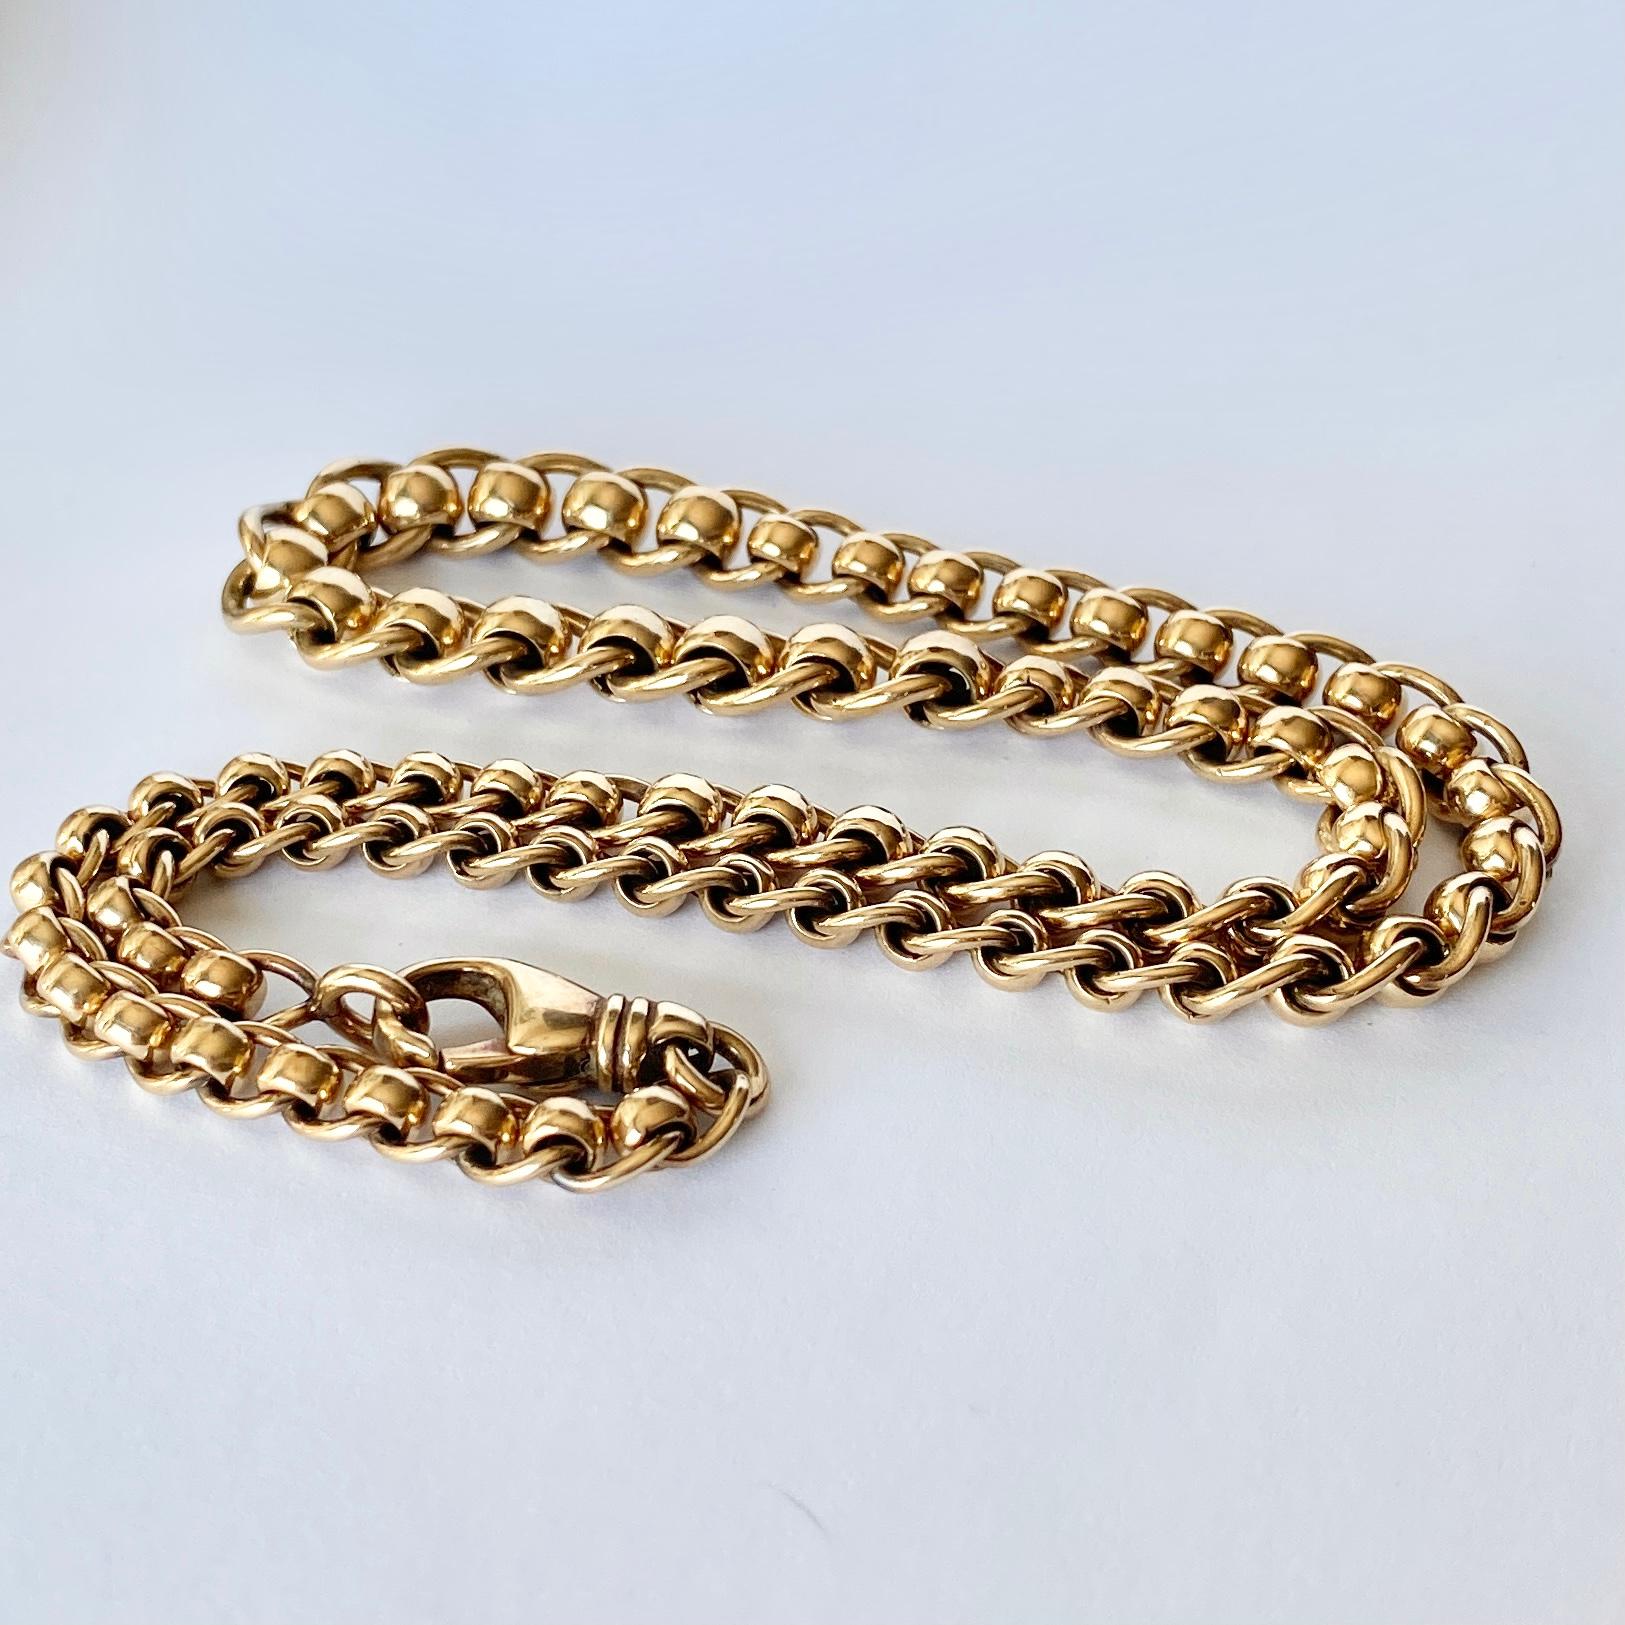 This 9carat gold necklace is made up of glossy beads and links. The necklace is fastened with a simple clasp and loop. 

Length: 43cm
Width: 8-5.5mm

Weight: 41g